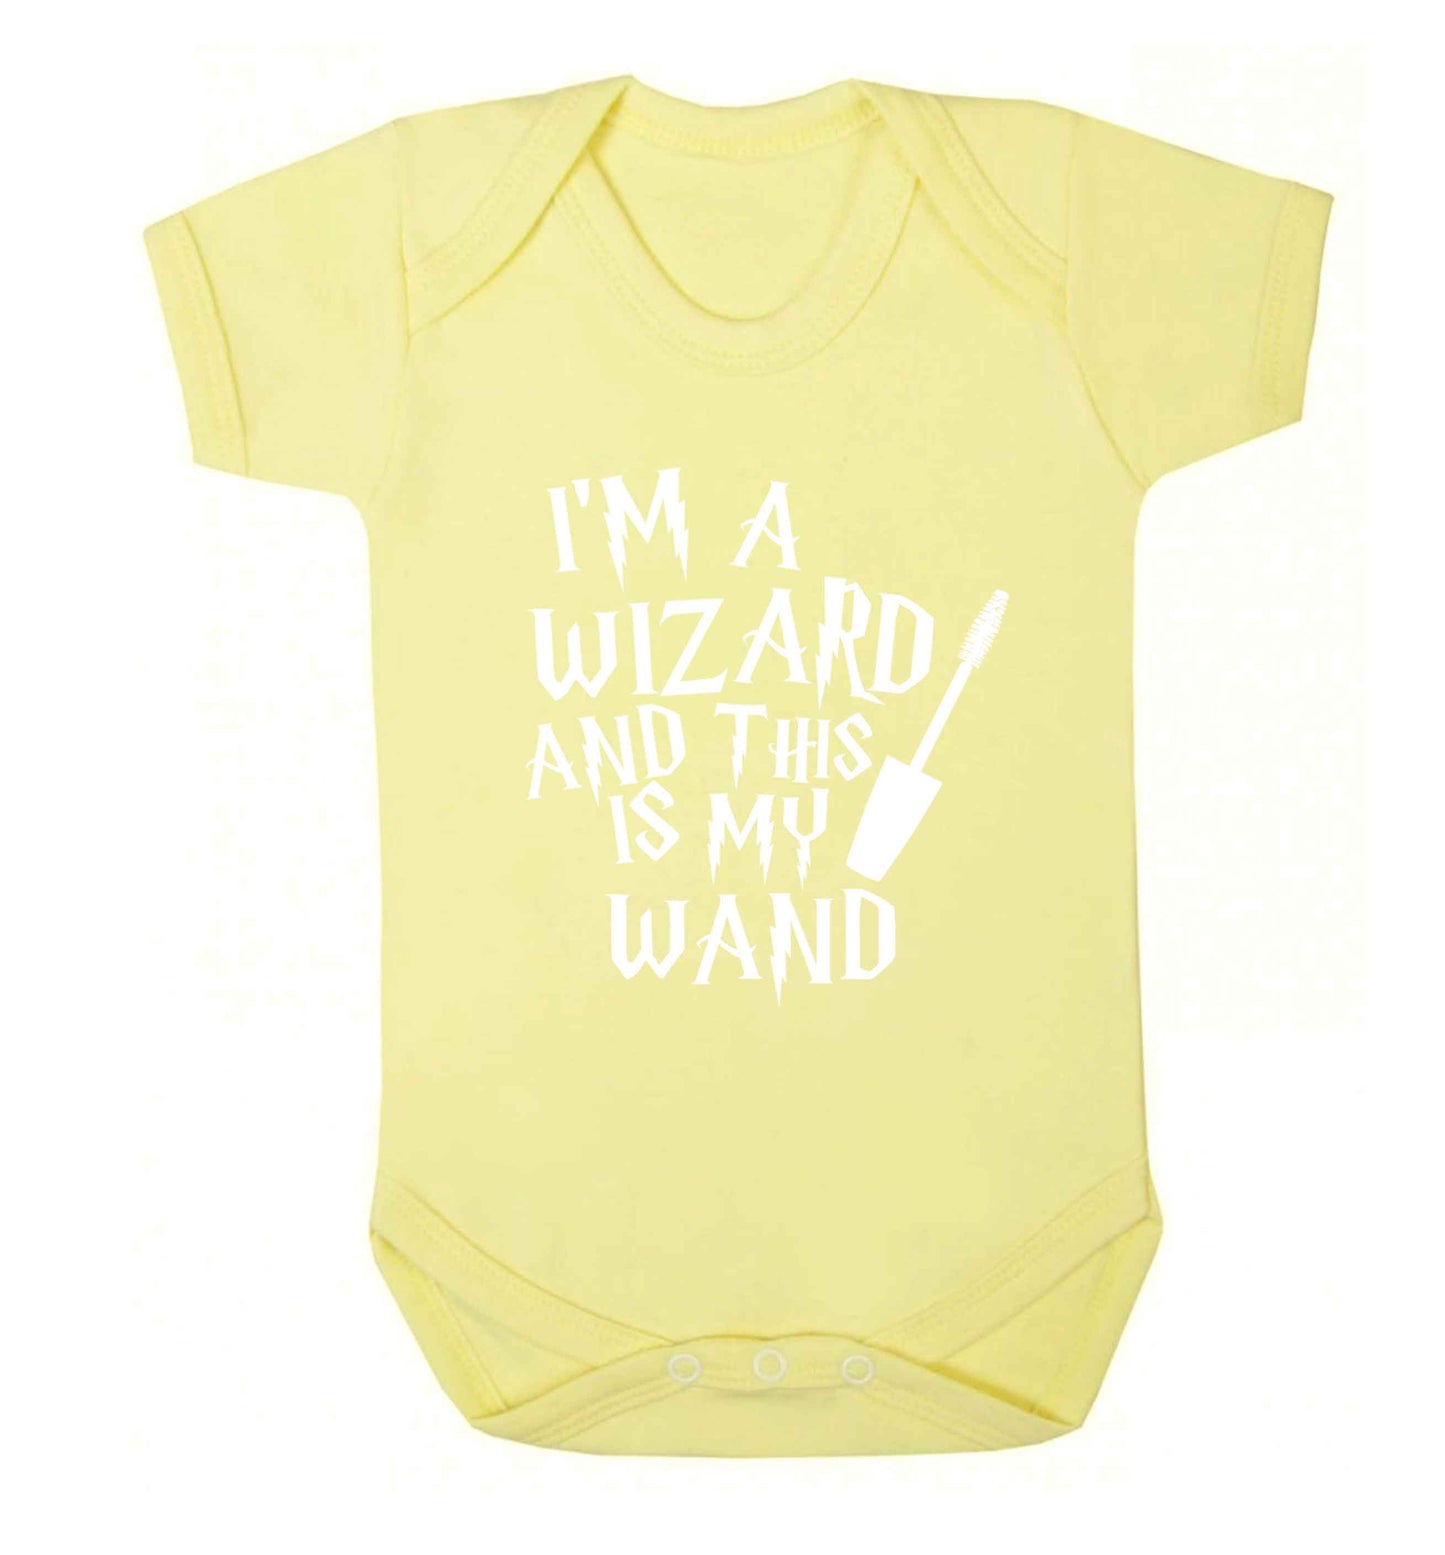 I'm a wizard and this is my wand Baby Vest pale yellow 18-24 months